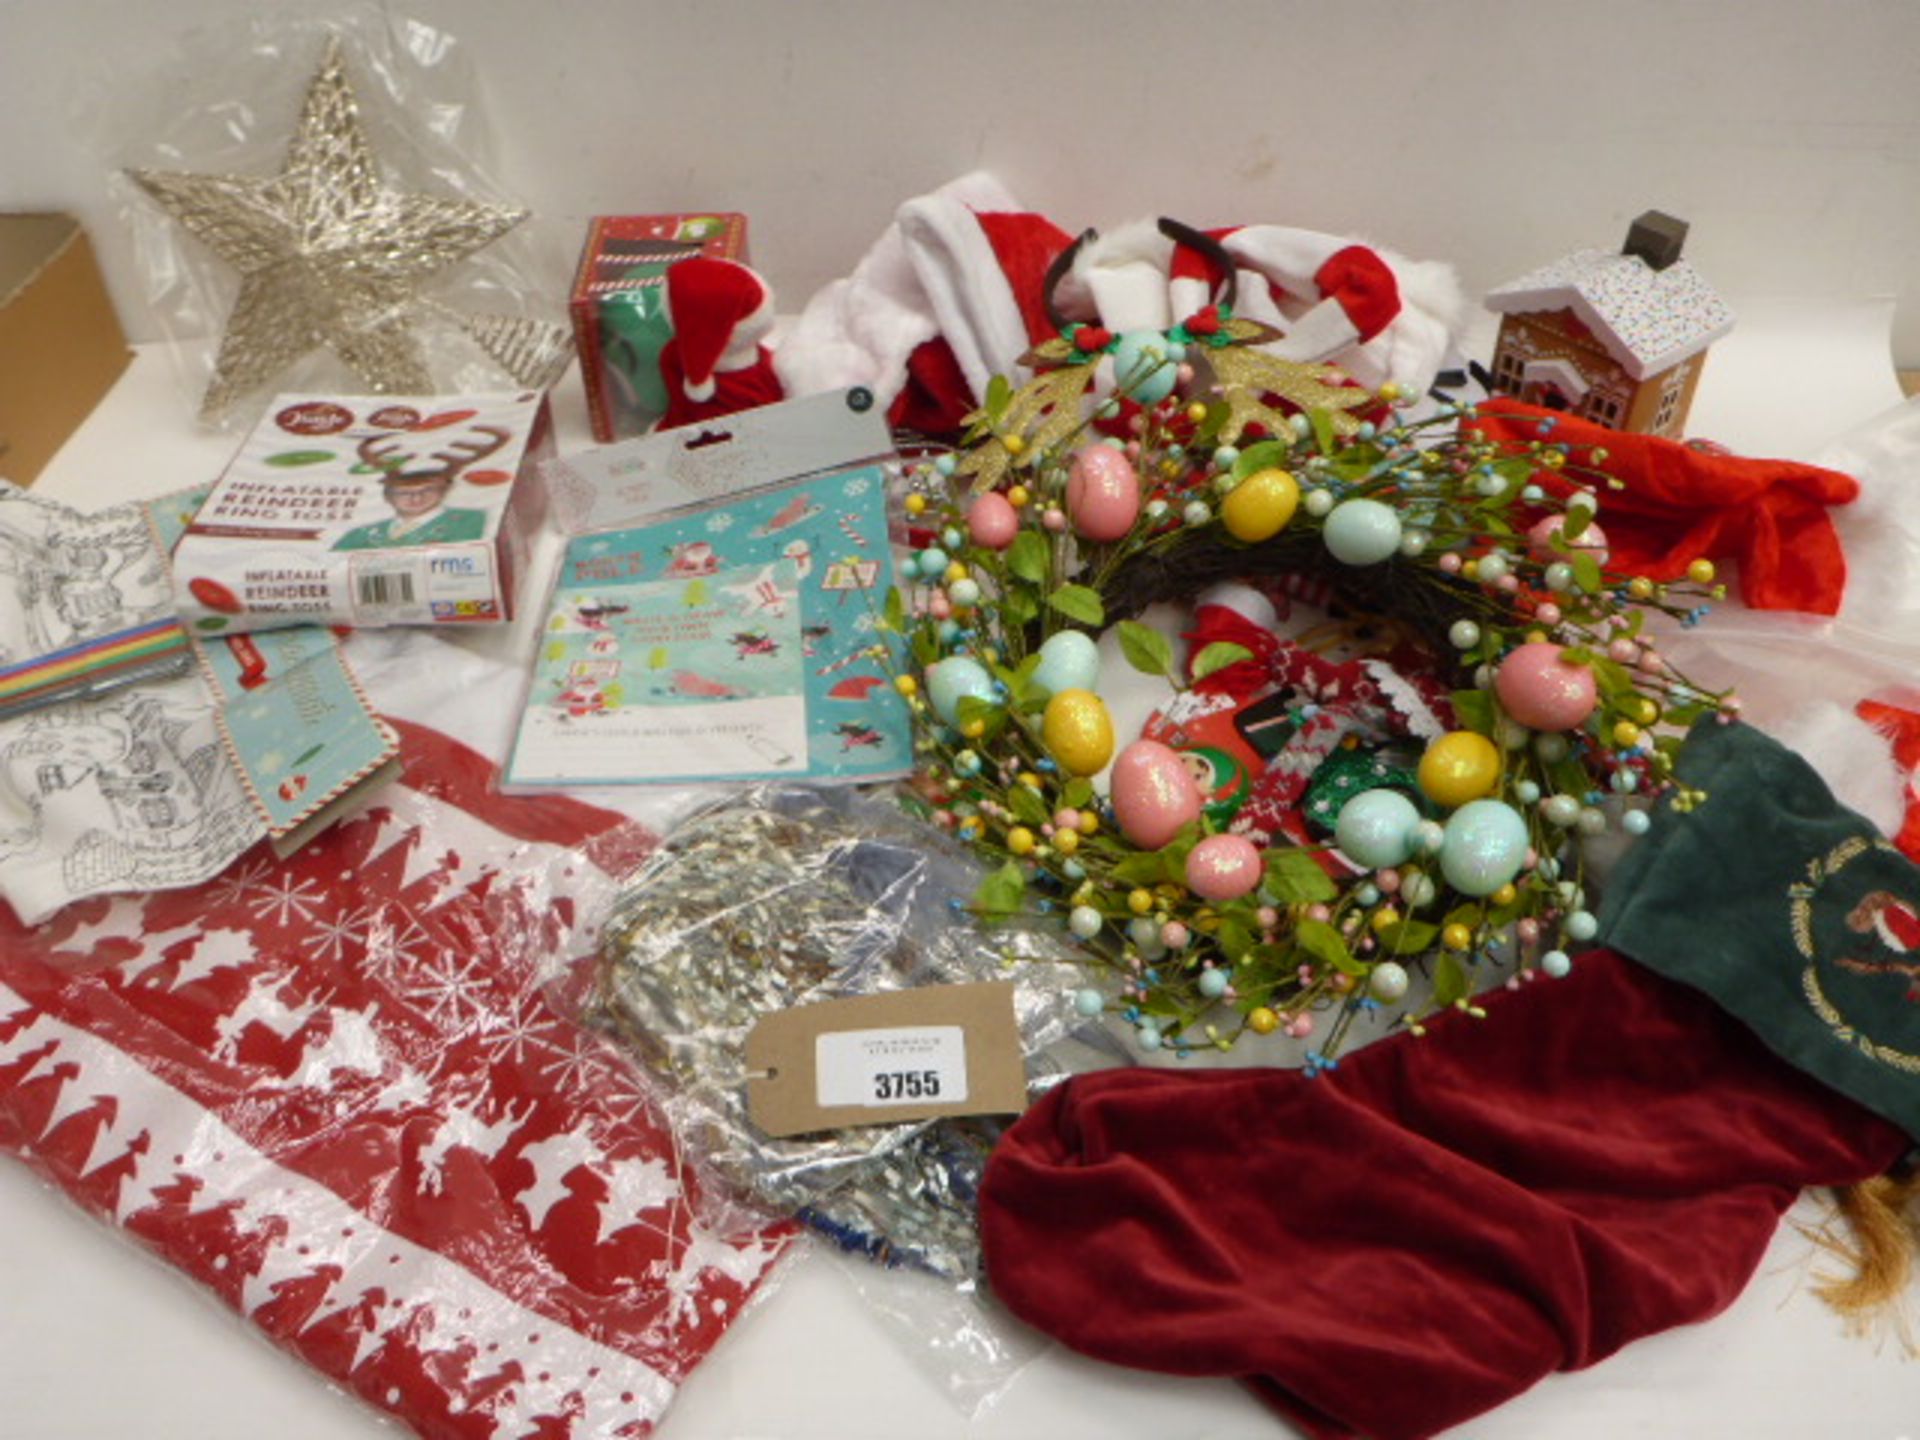 Christmas elves, stockings, hats, activity pack, wreath, Tree top star, games etc